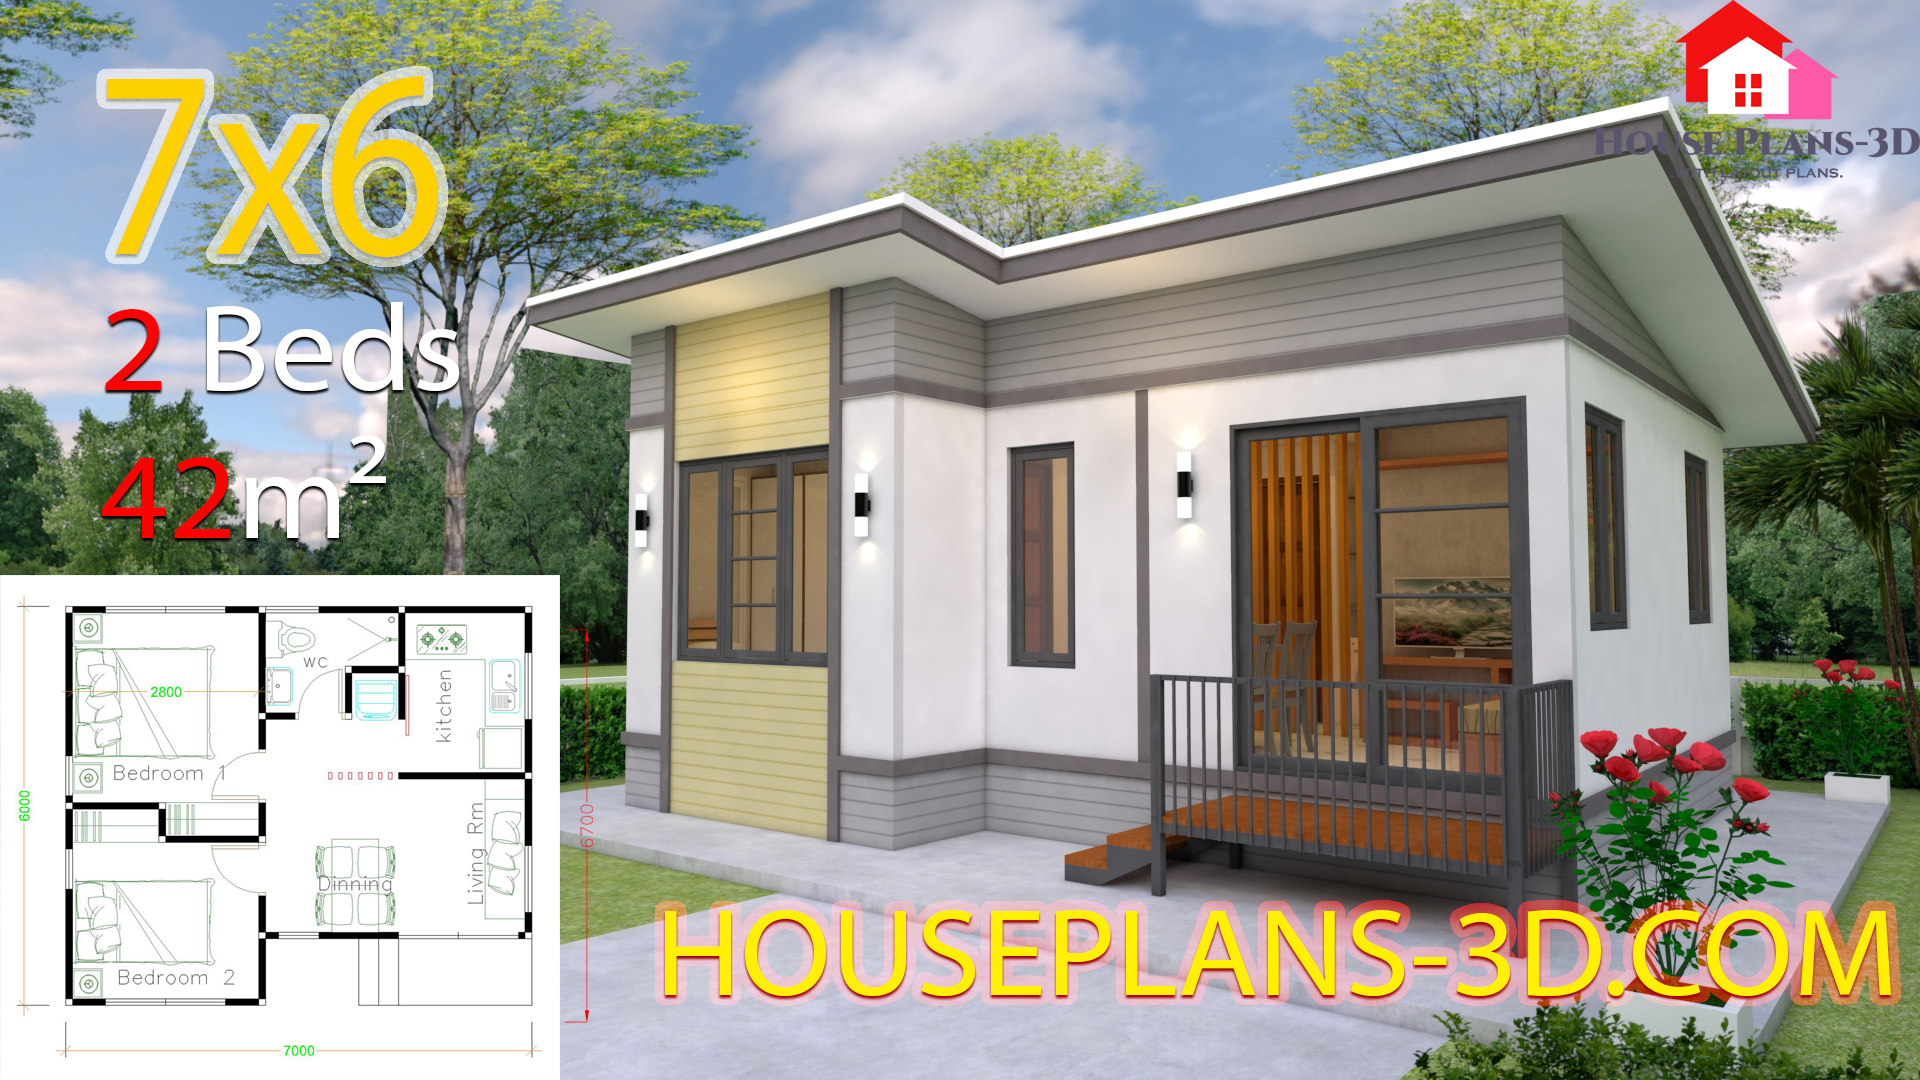 23 Glamour Small 2 Bedroom House - Home, Family, Style and Art Ideas